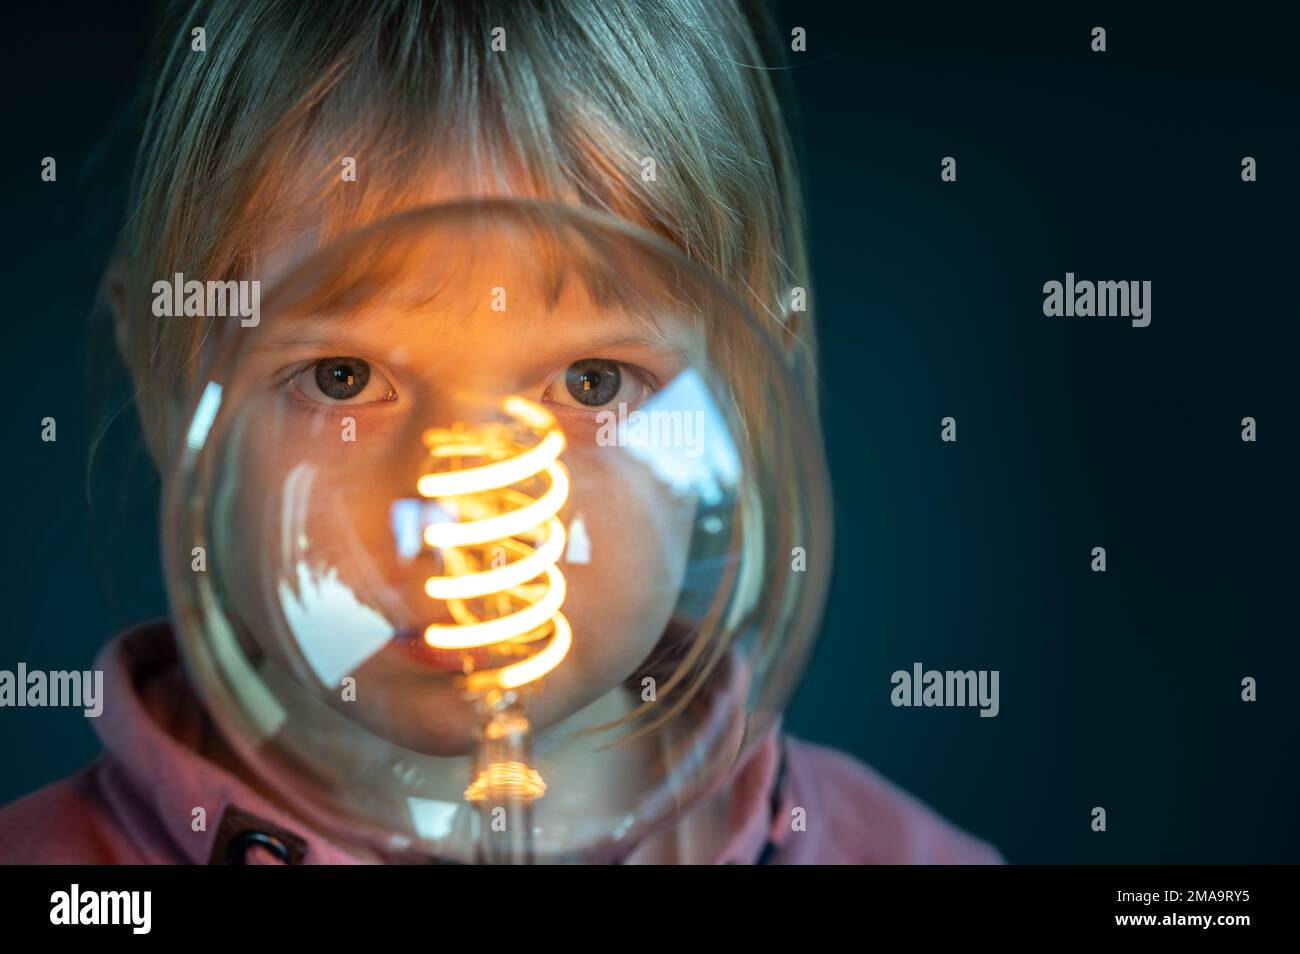 Young child looks concentrated through a filament light bulb. Symbol for a child curiously discovering the world. Stock Photo